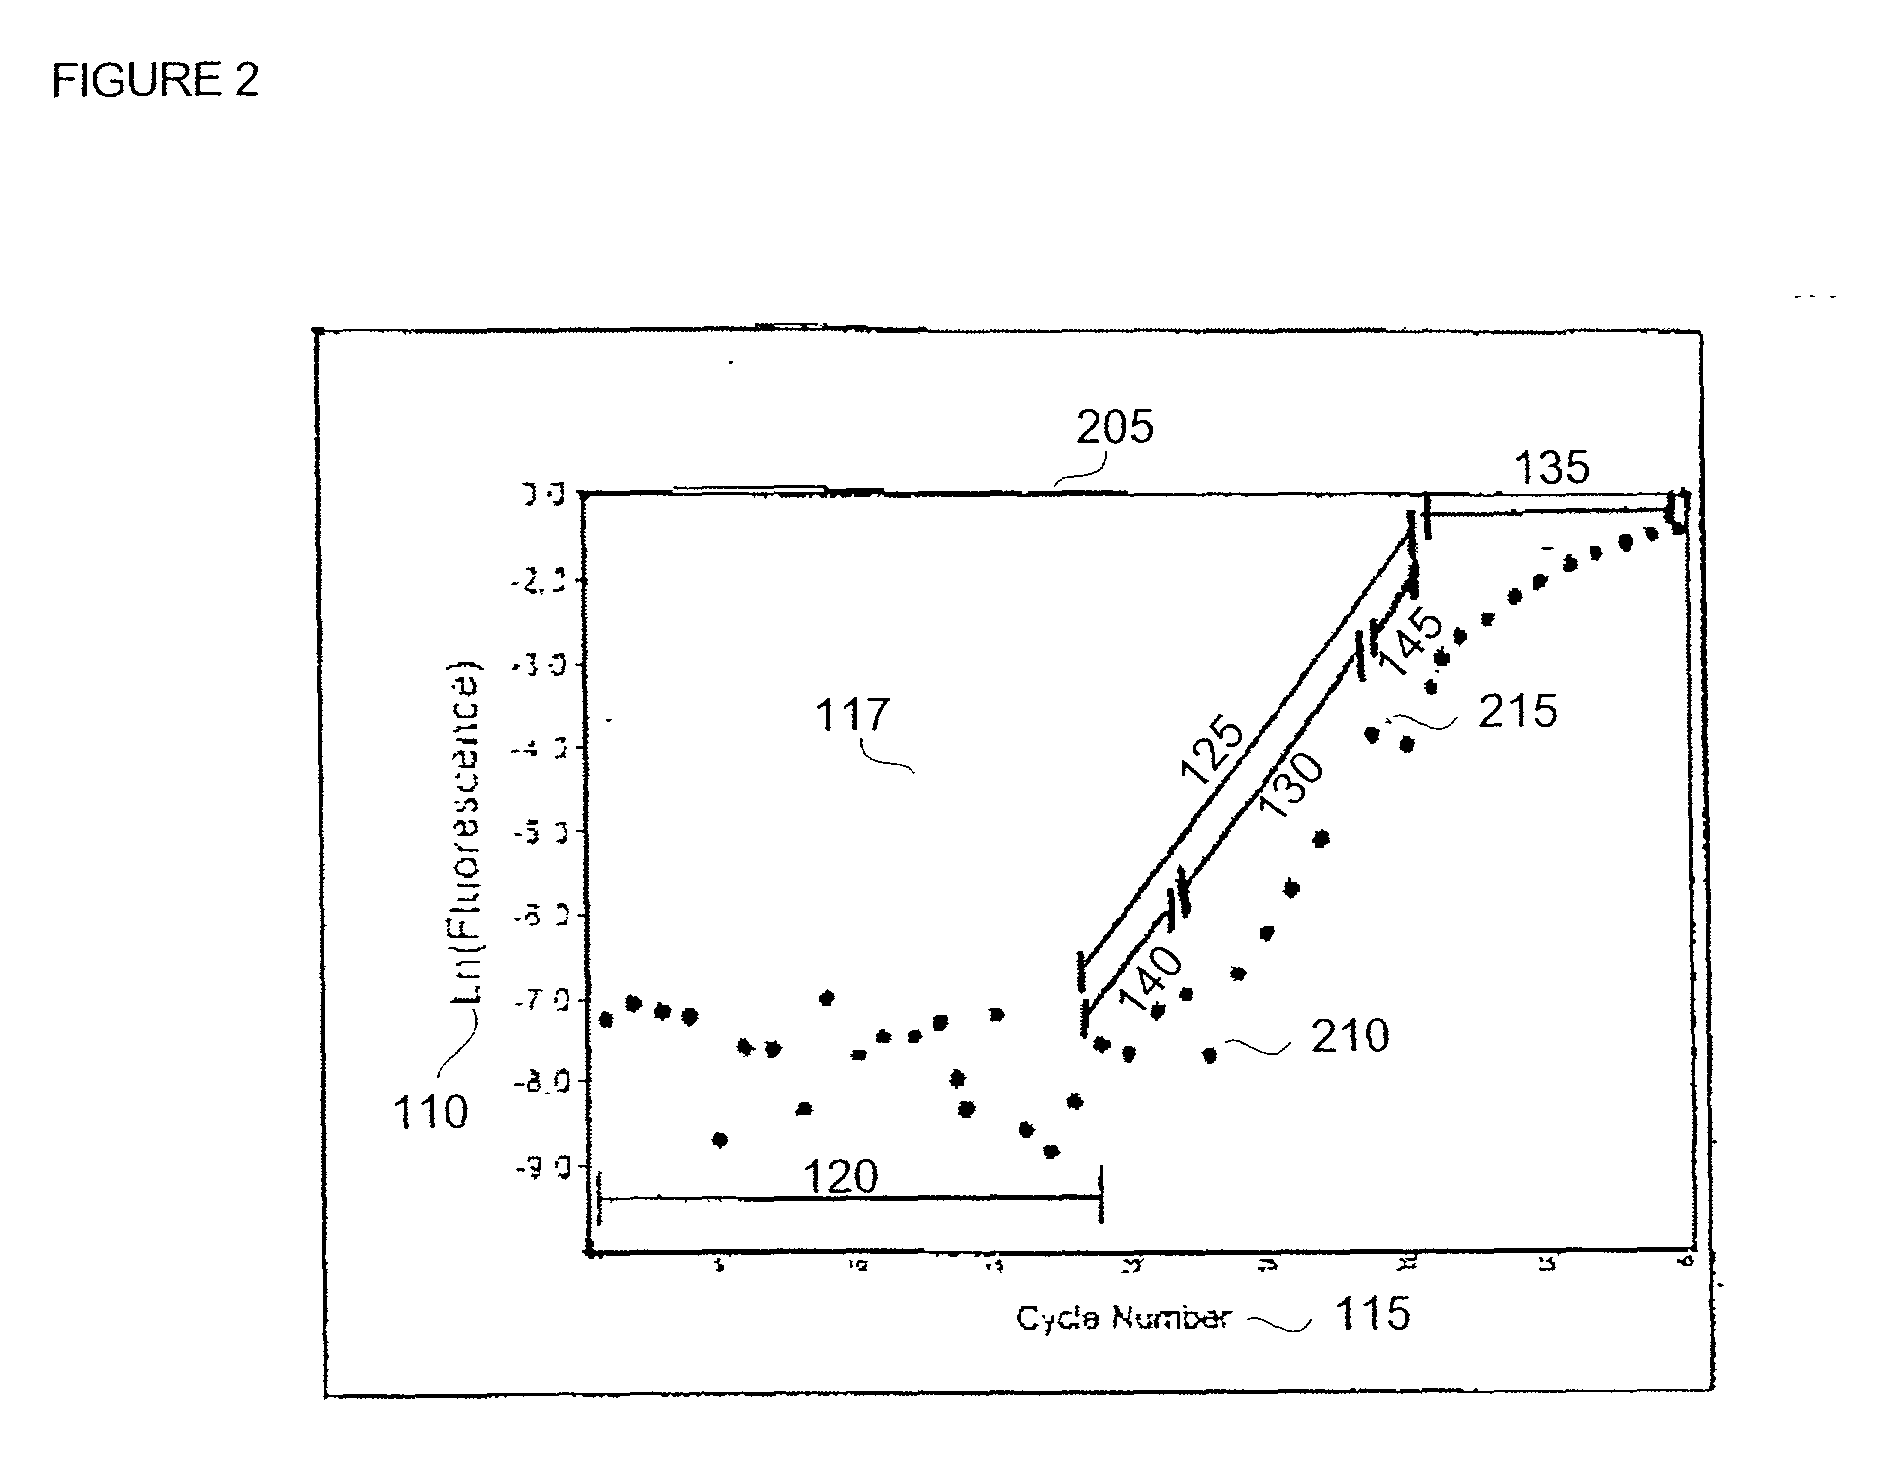 Automatic threshold setting for quantitative polymerase chain reaction